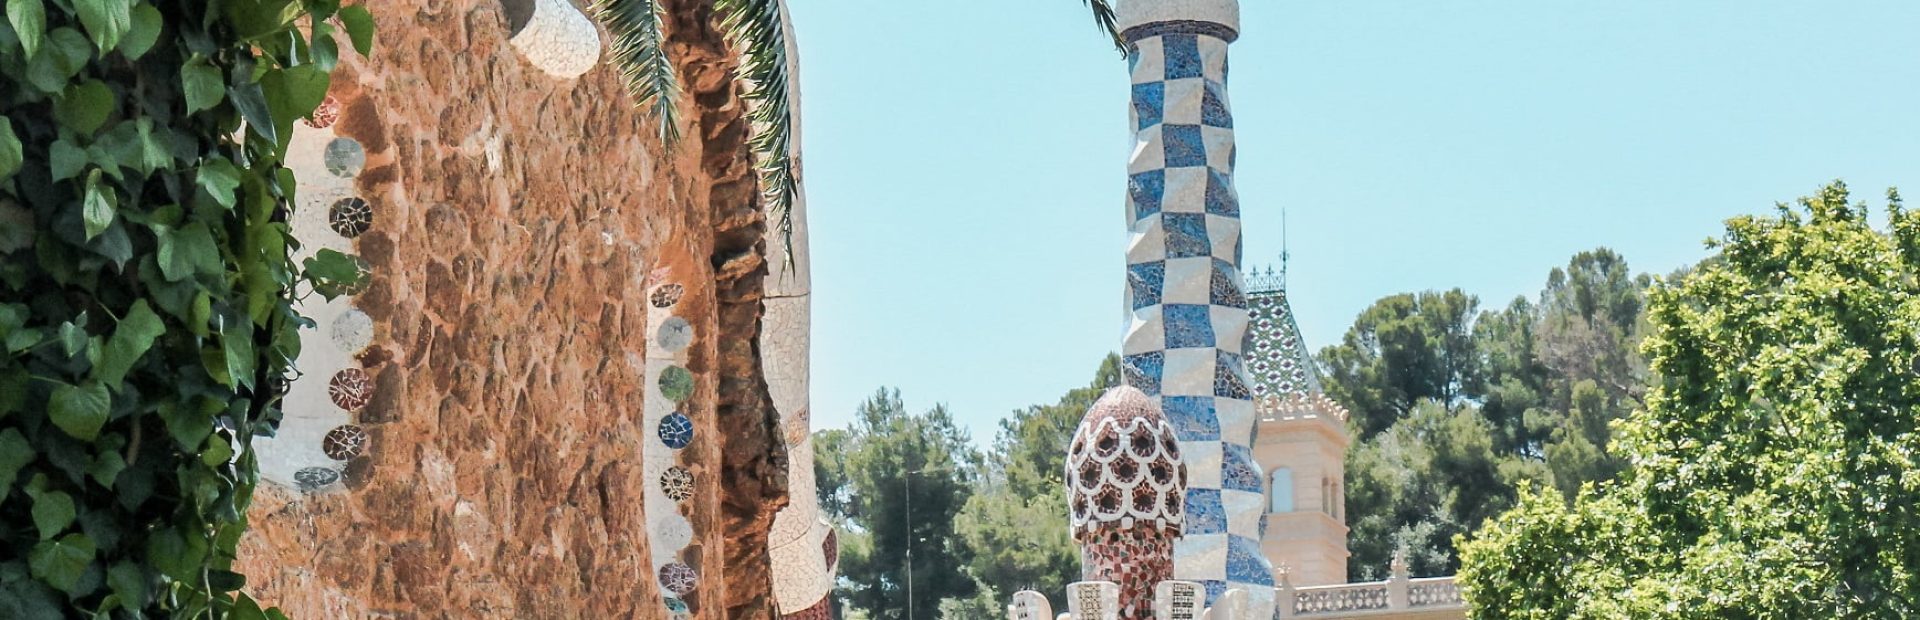 Park-Guell-Barcelona-Glimpses-of-the-World